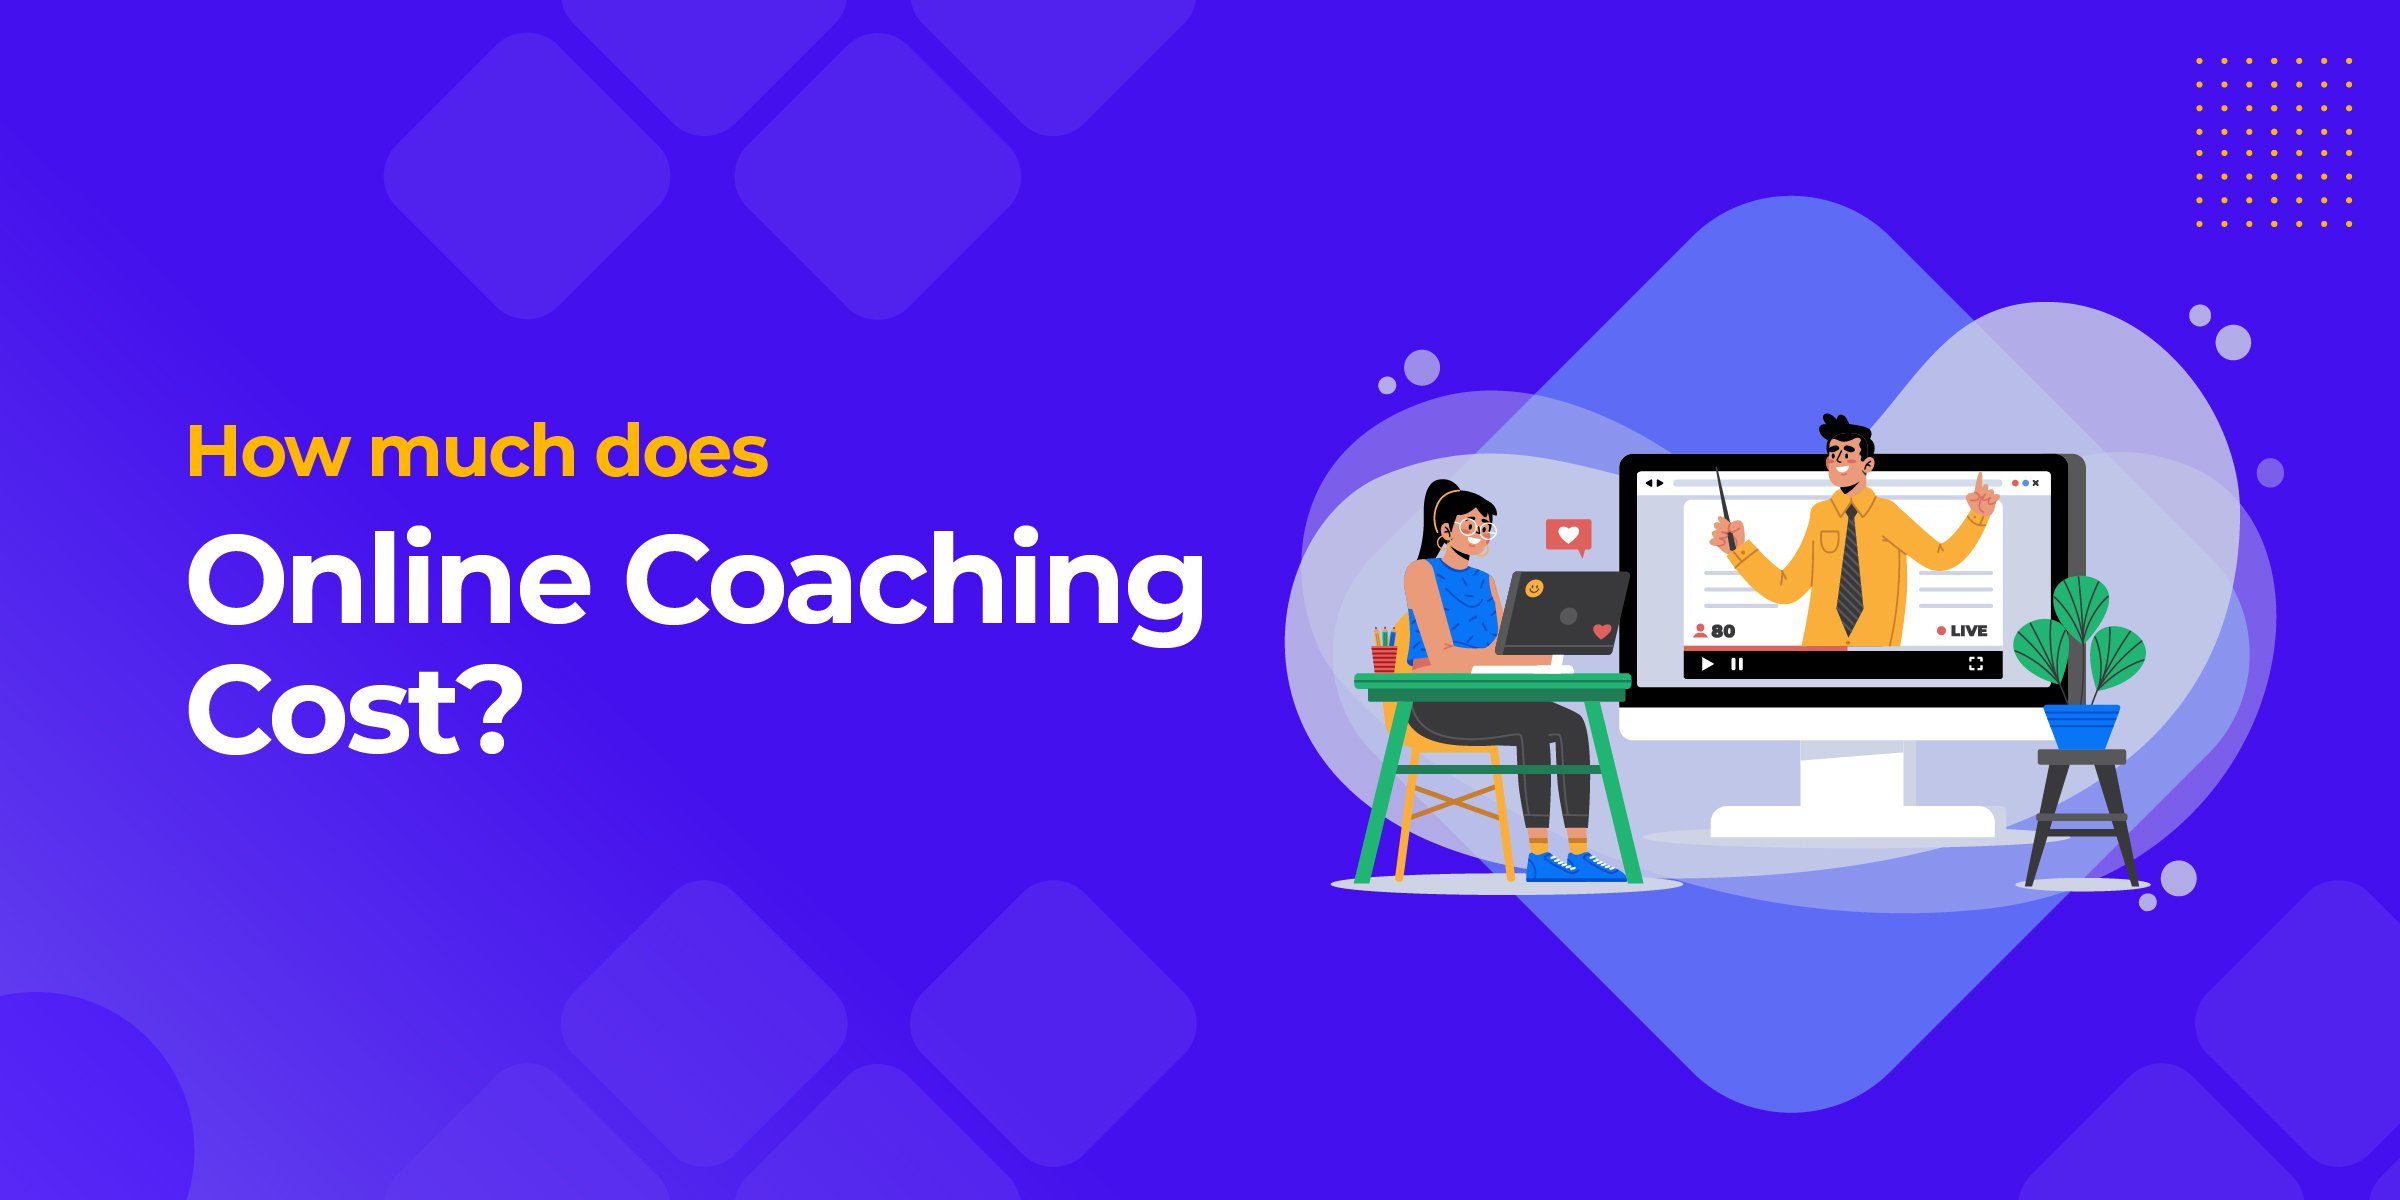 How Much Does Online Coaching Cost?